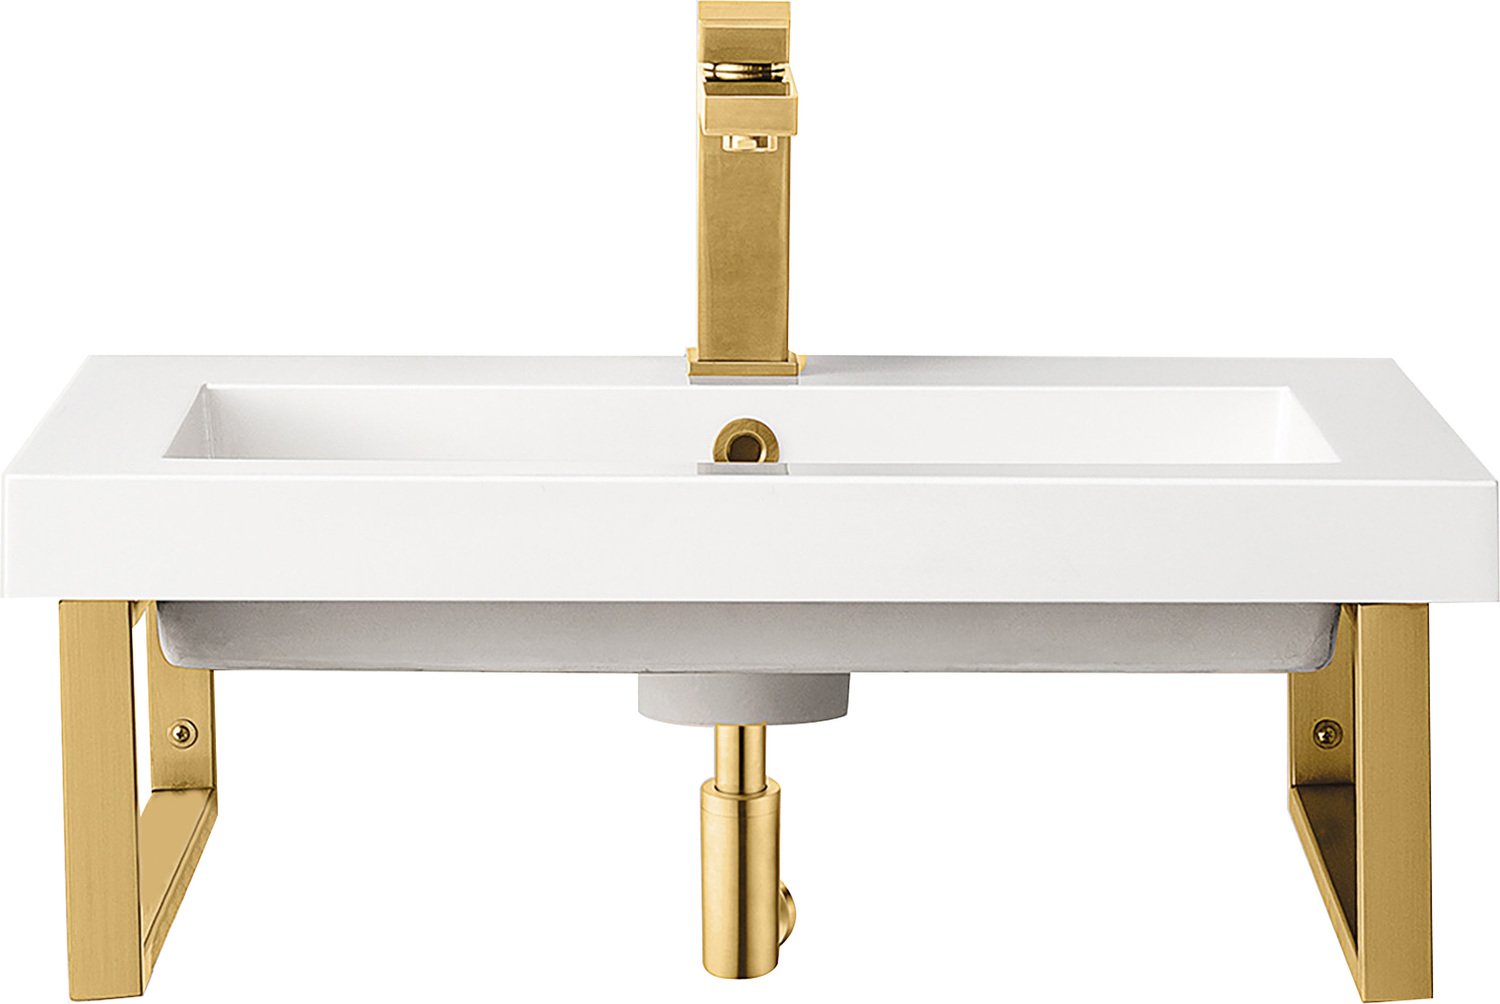 double bathroom cabinets James Martin Floating Console Radiant Gold Modern